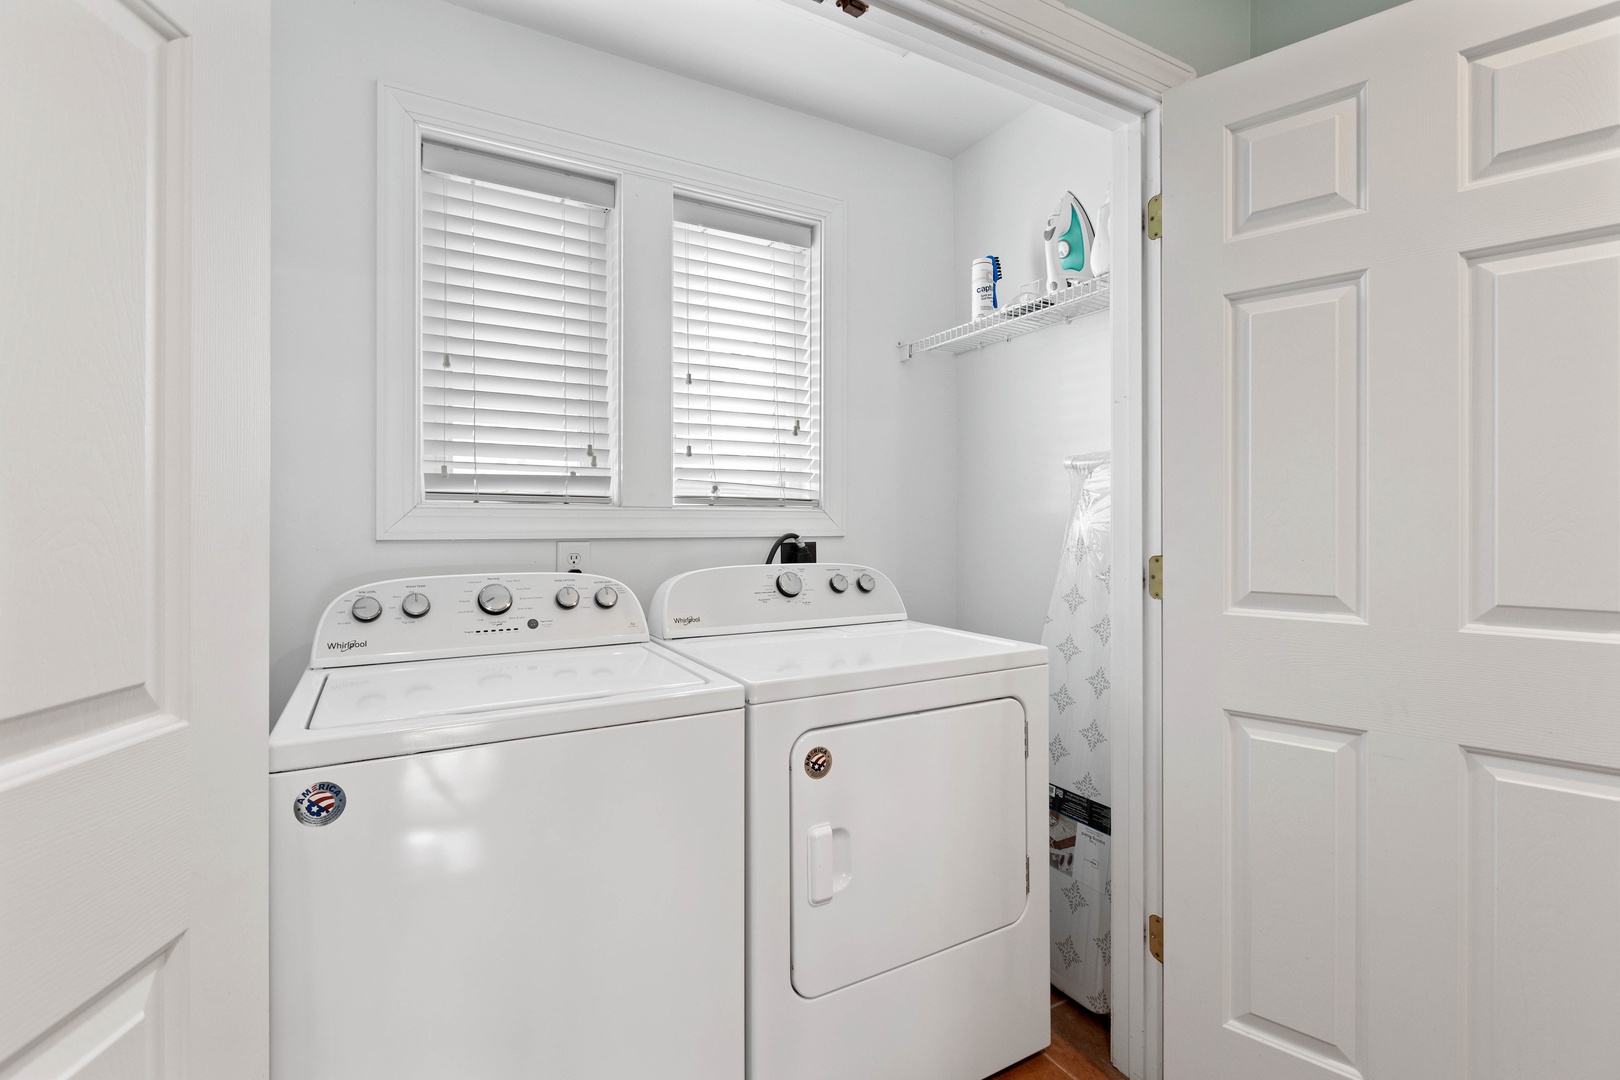 The in-unit washer and dryer